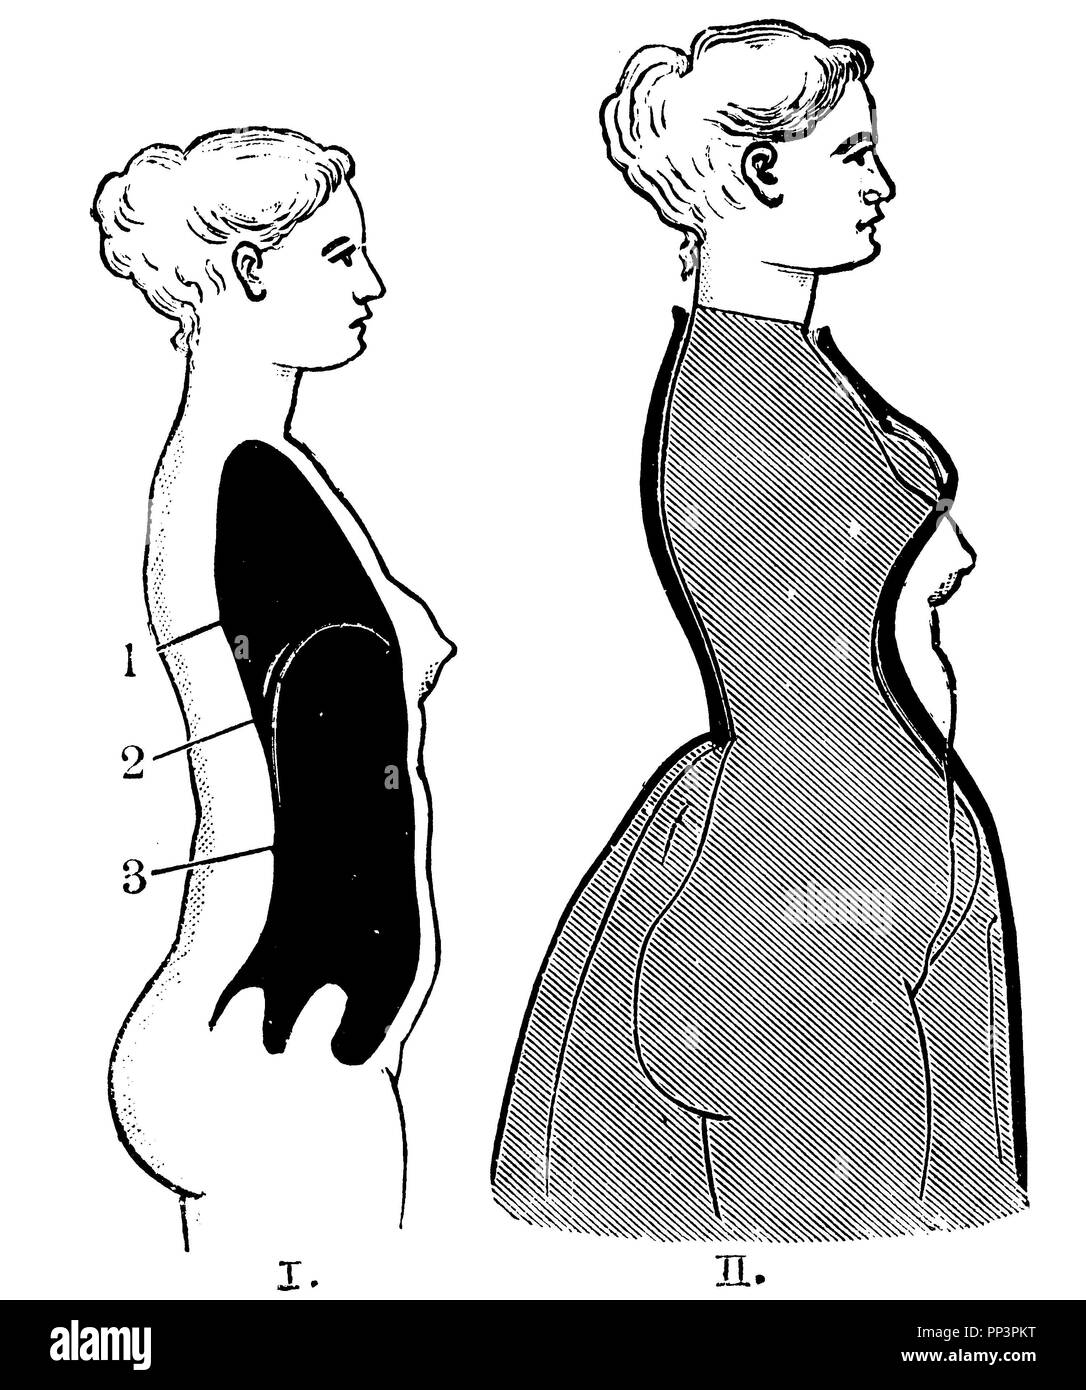 I. Female body without corset. II. Change of shape through the corset. After Dickinson. 1 chest cavity, 2 diaphragm 3 abdominal cavity,   1905 Stock Photo